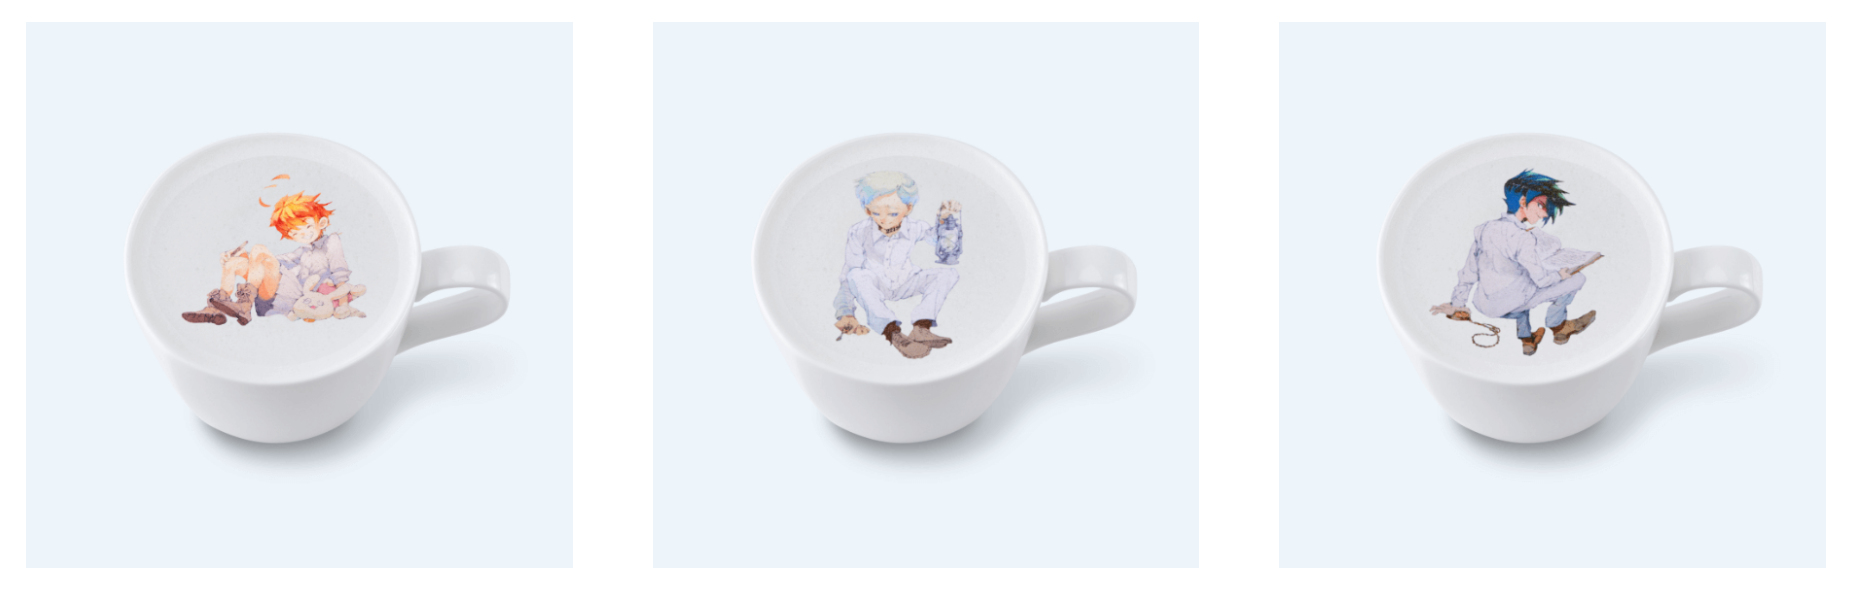 The Promised Neverland Exhibition 7 - character lattes